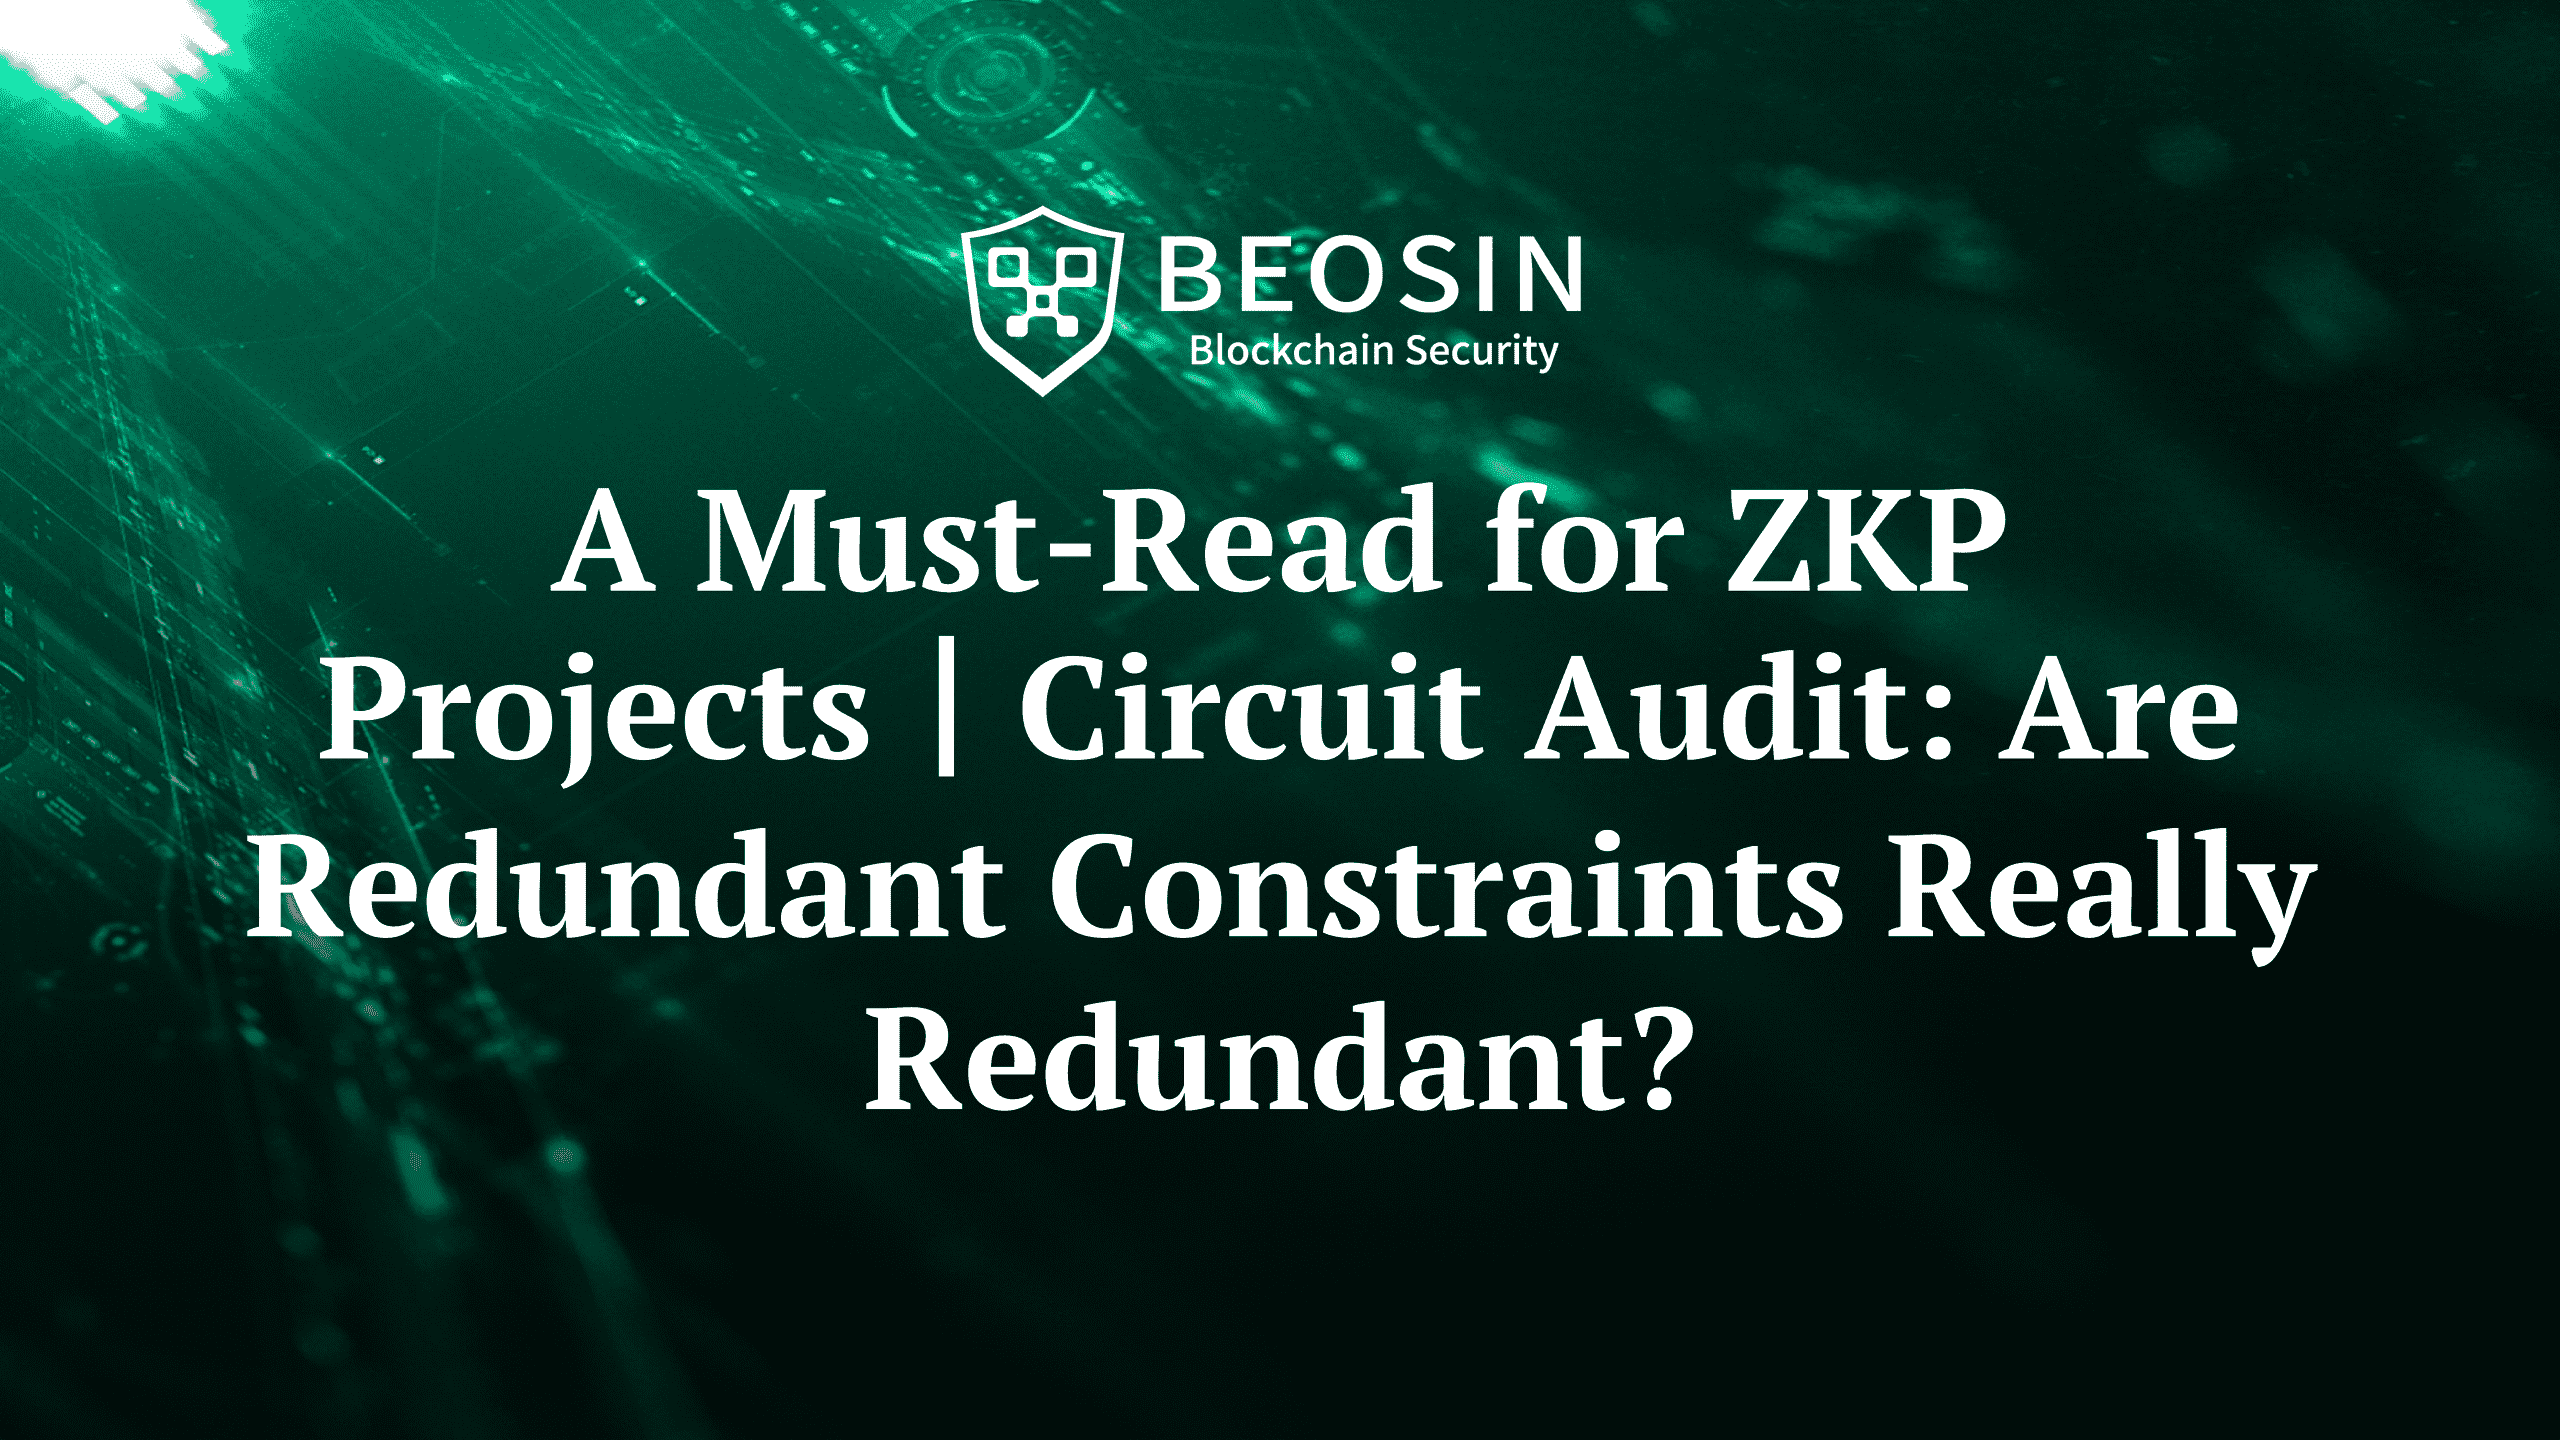 A Must-Read for ZKP Projects｜Circuit Audit: Are Redundant Constraints Really Redundant?